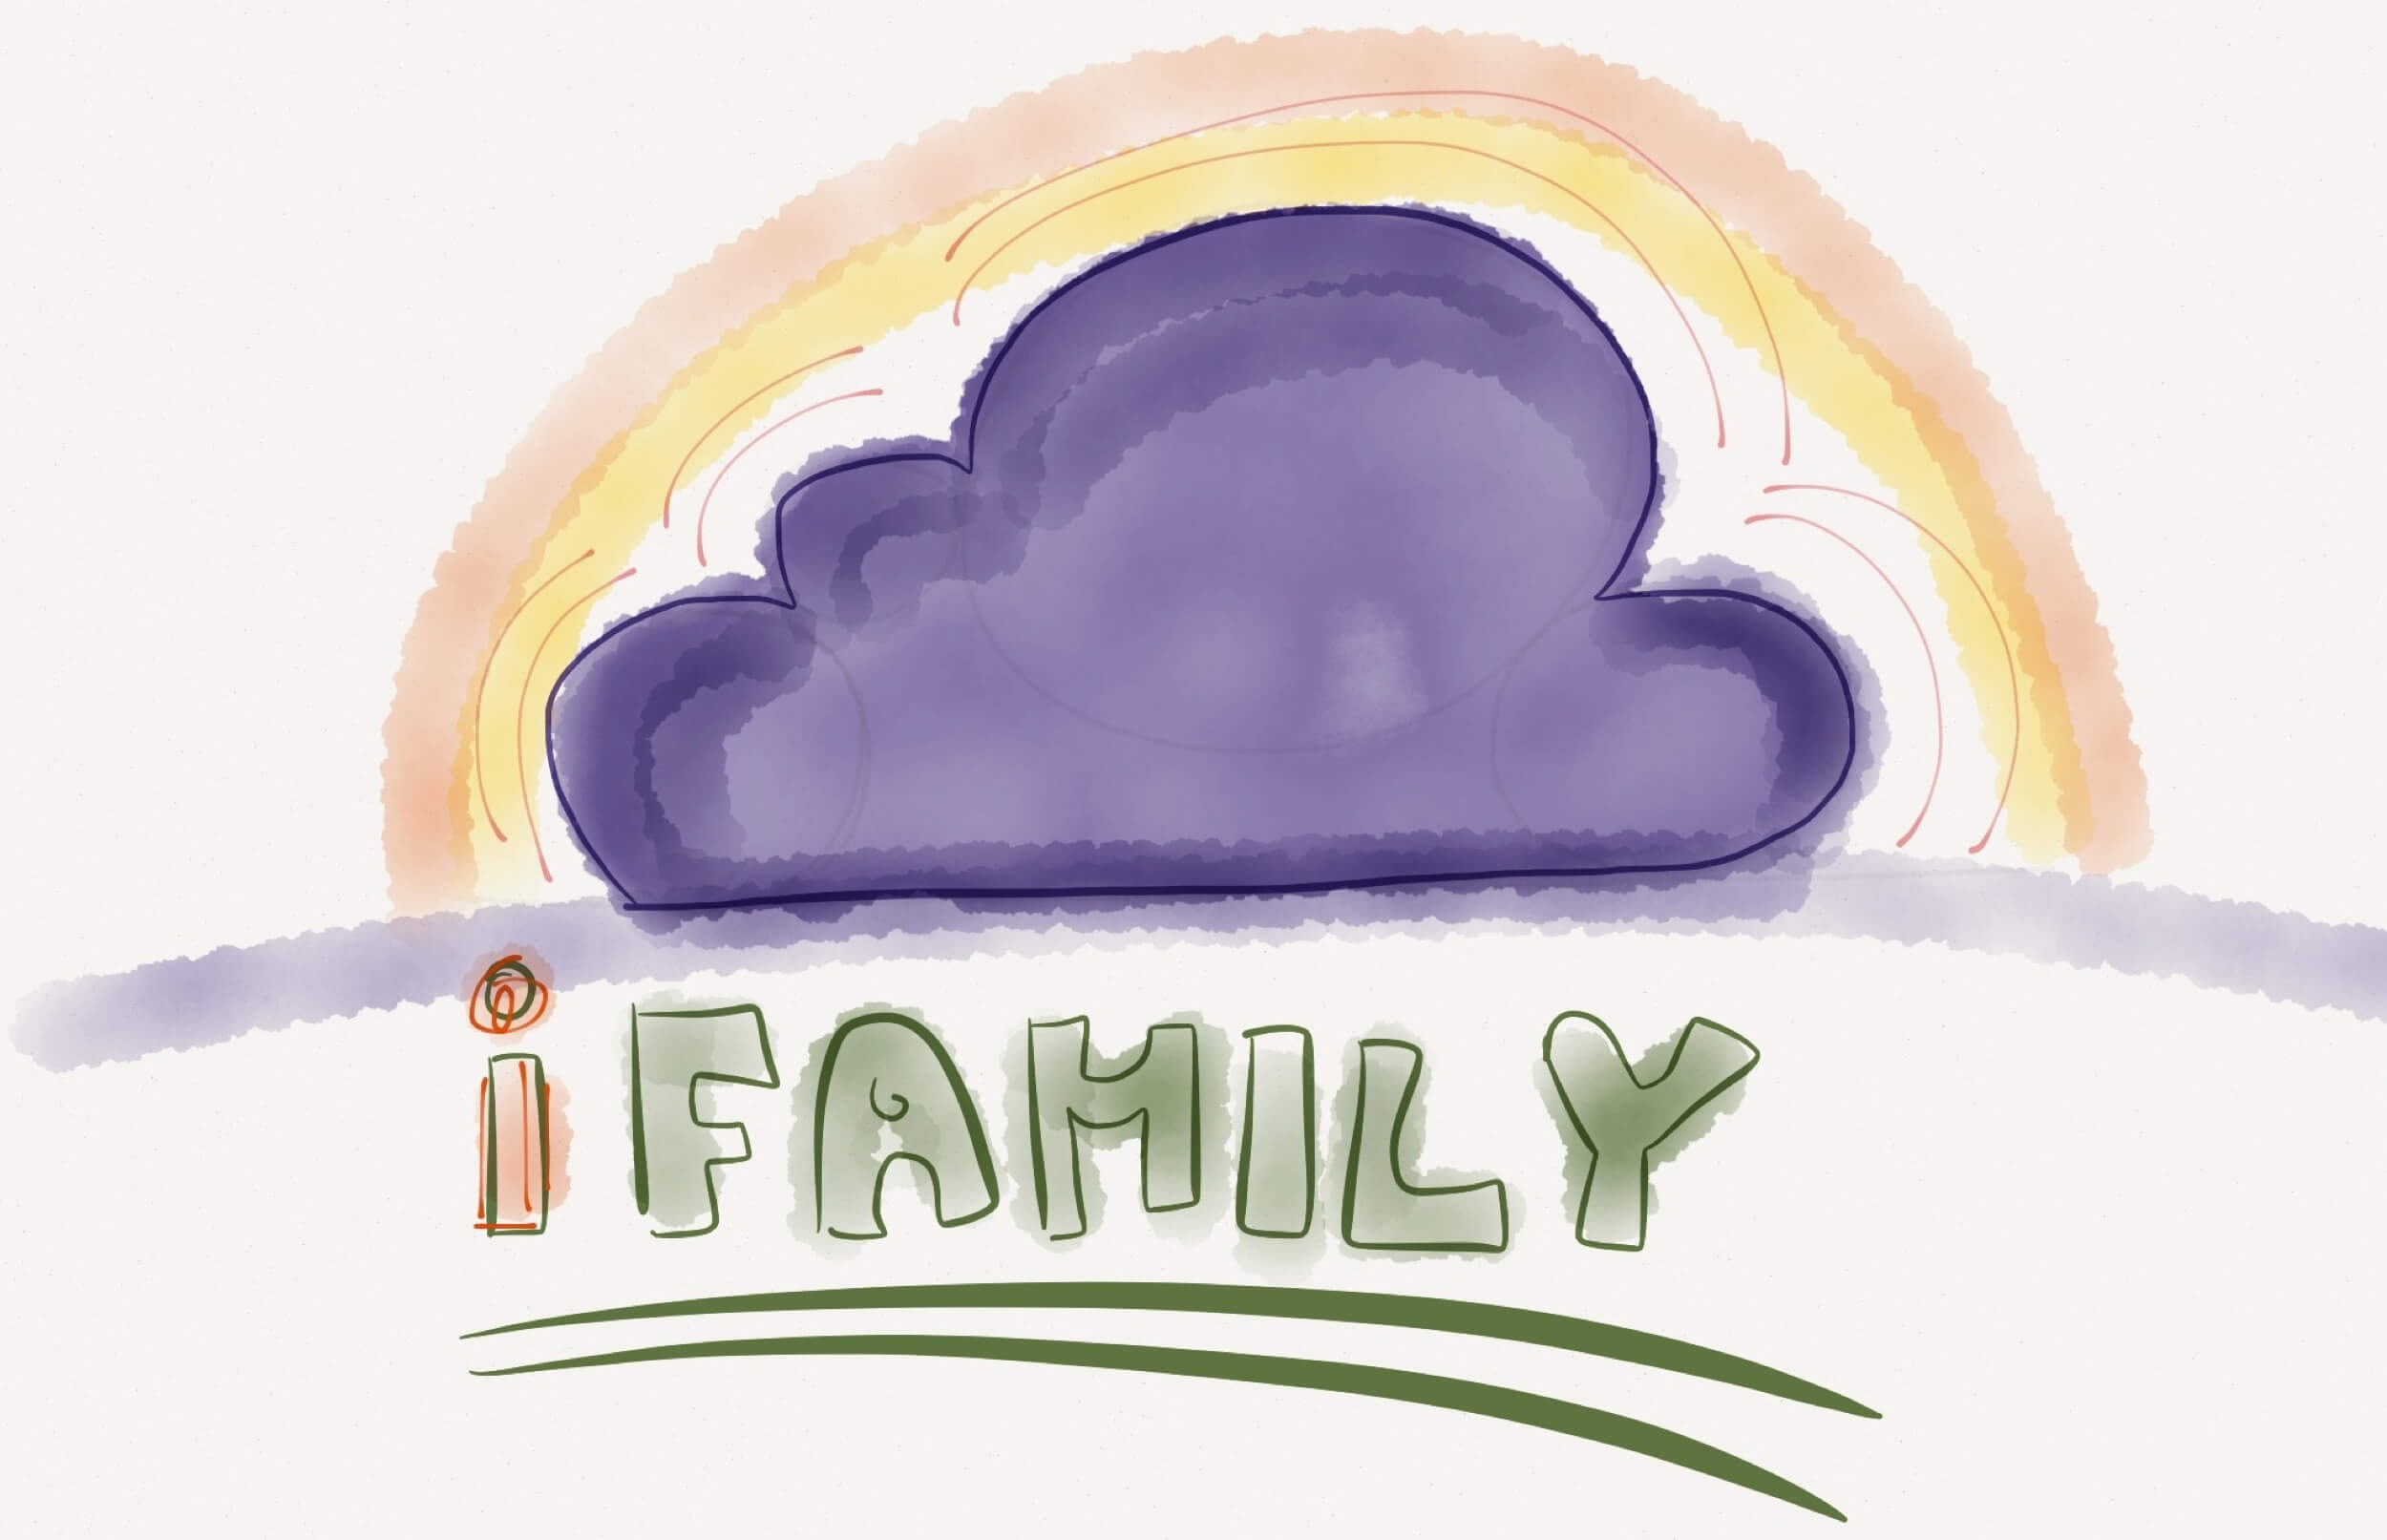 Syncing family in the cloud - two ways to set up iCloud with your spouse